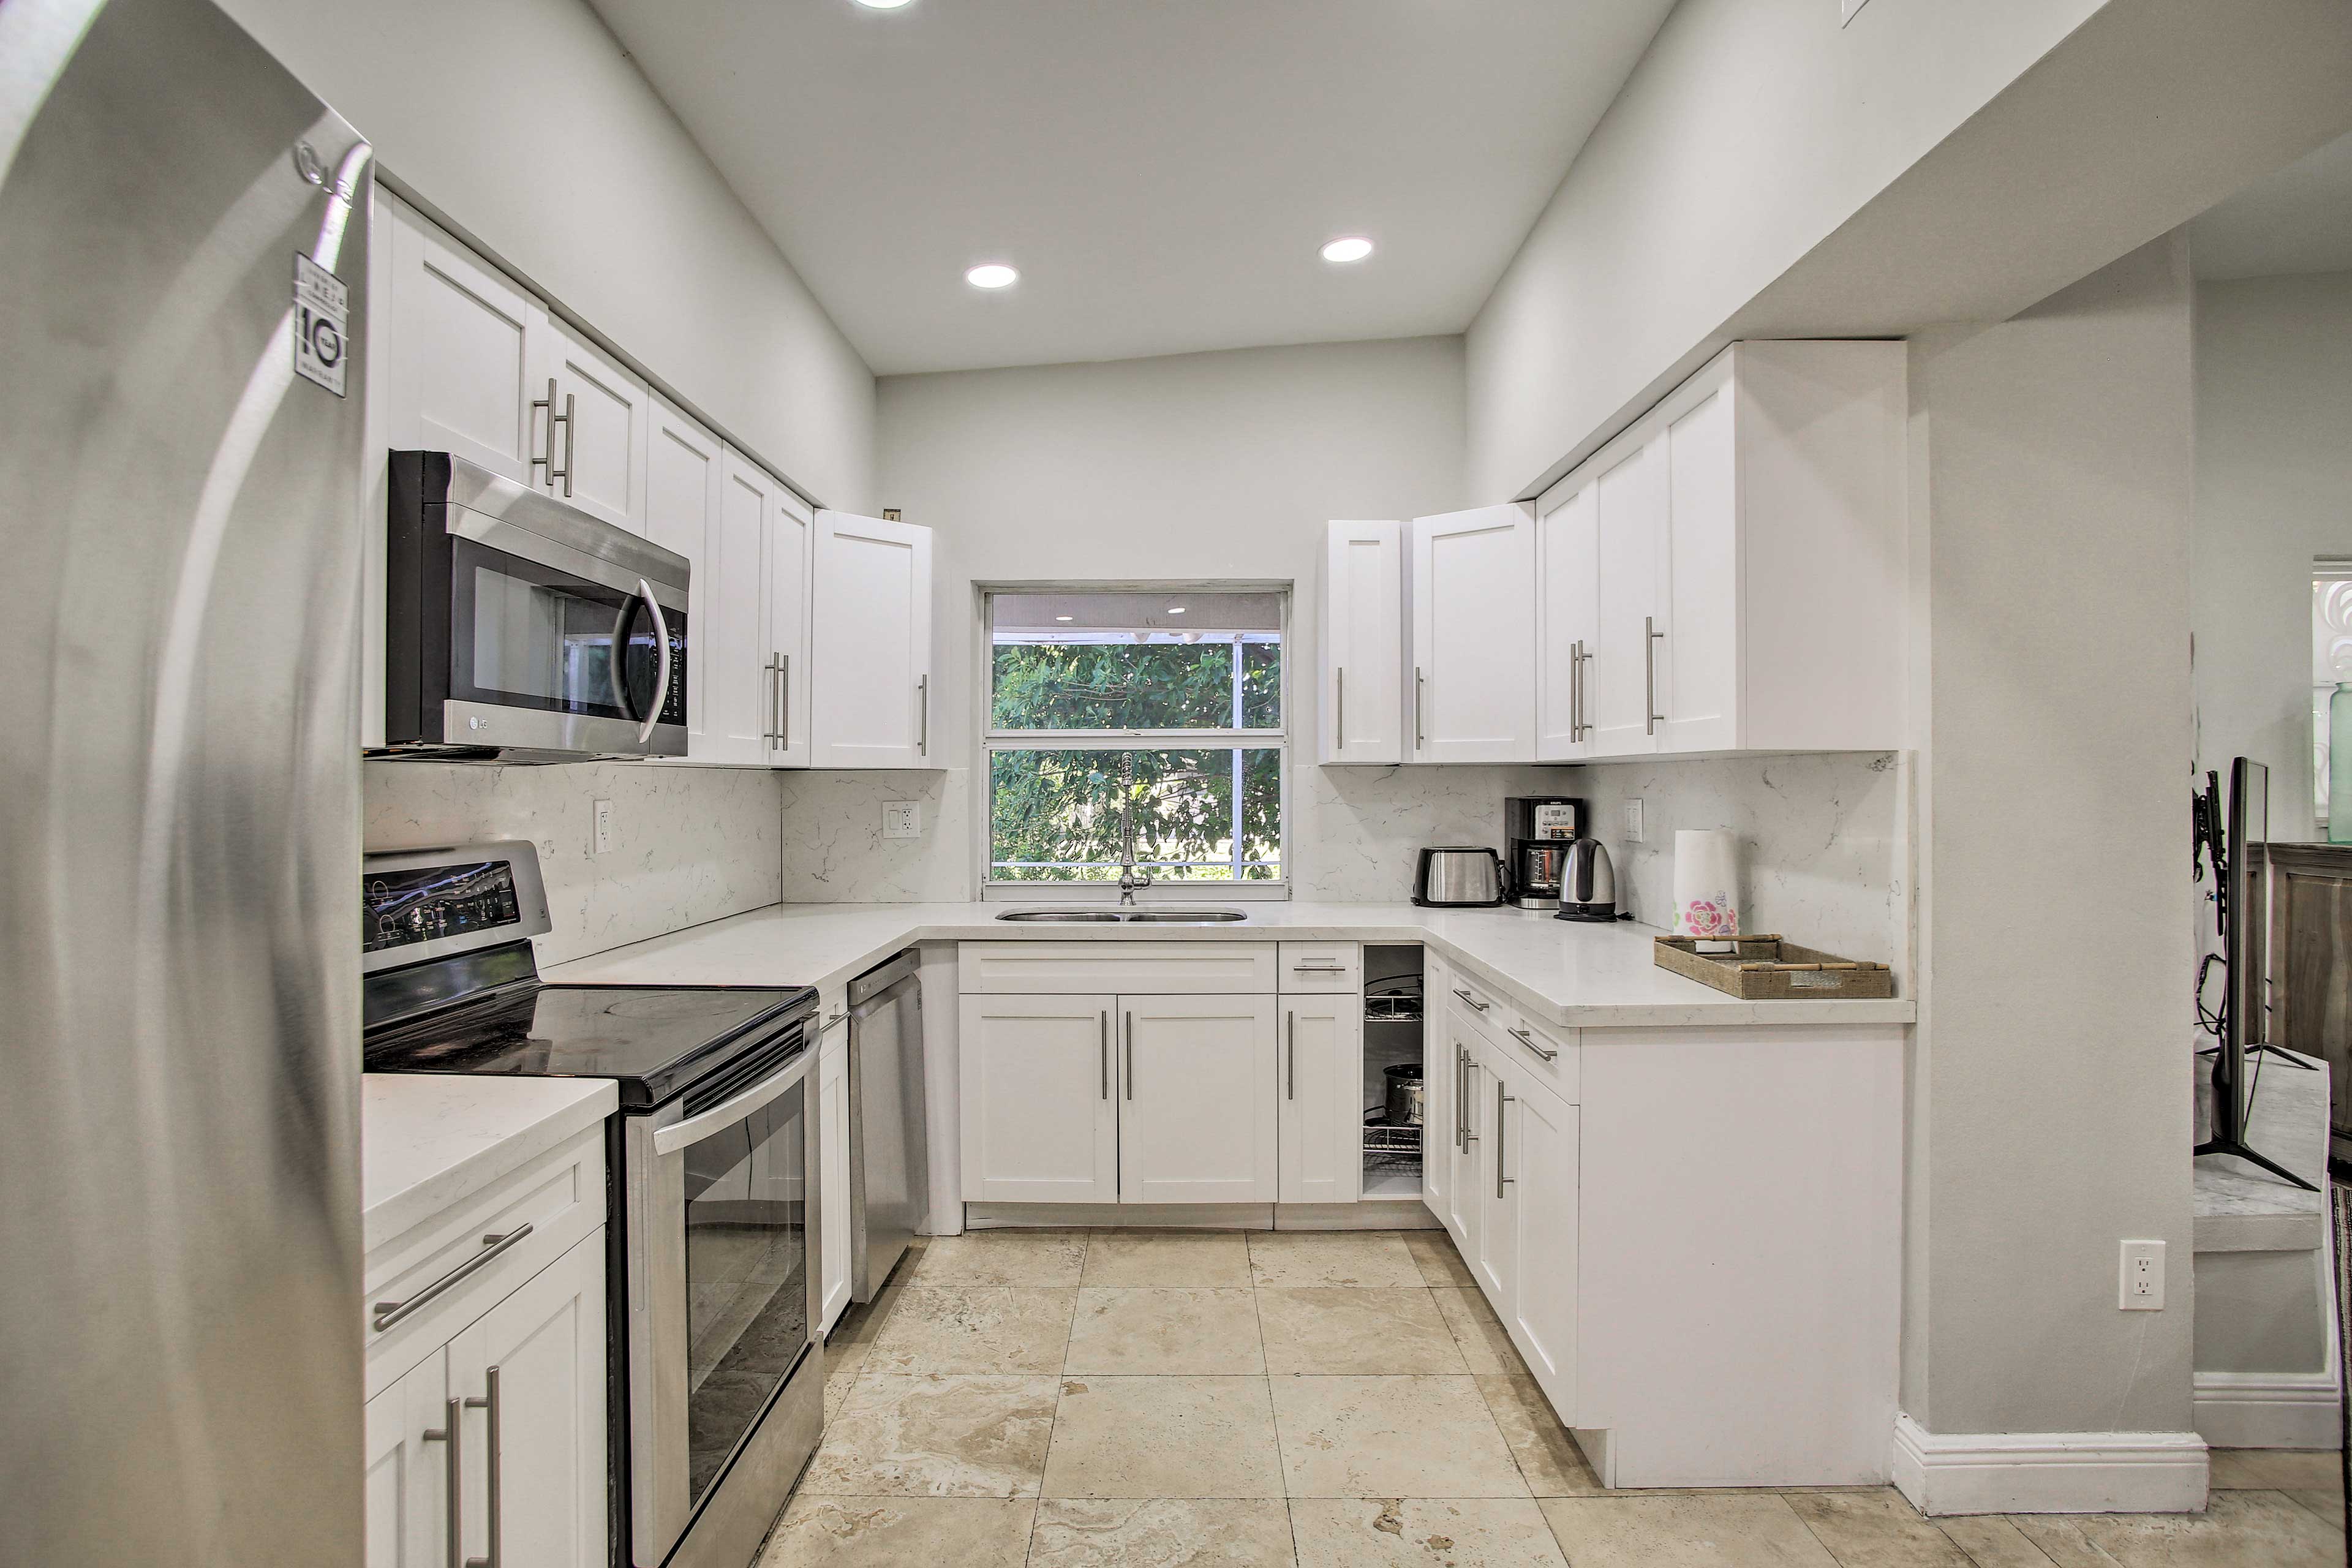 The kitchen is fully equipped with stainless steel appliances.